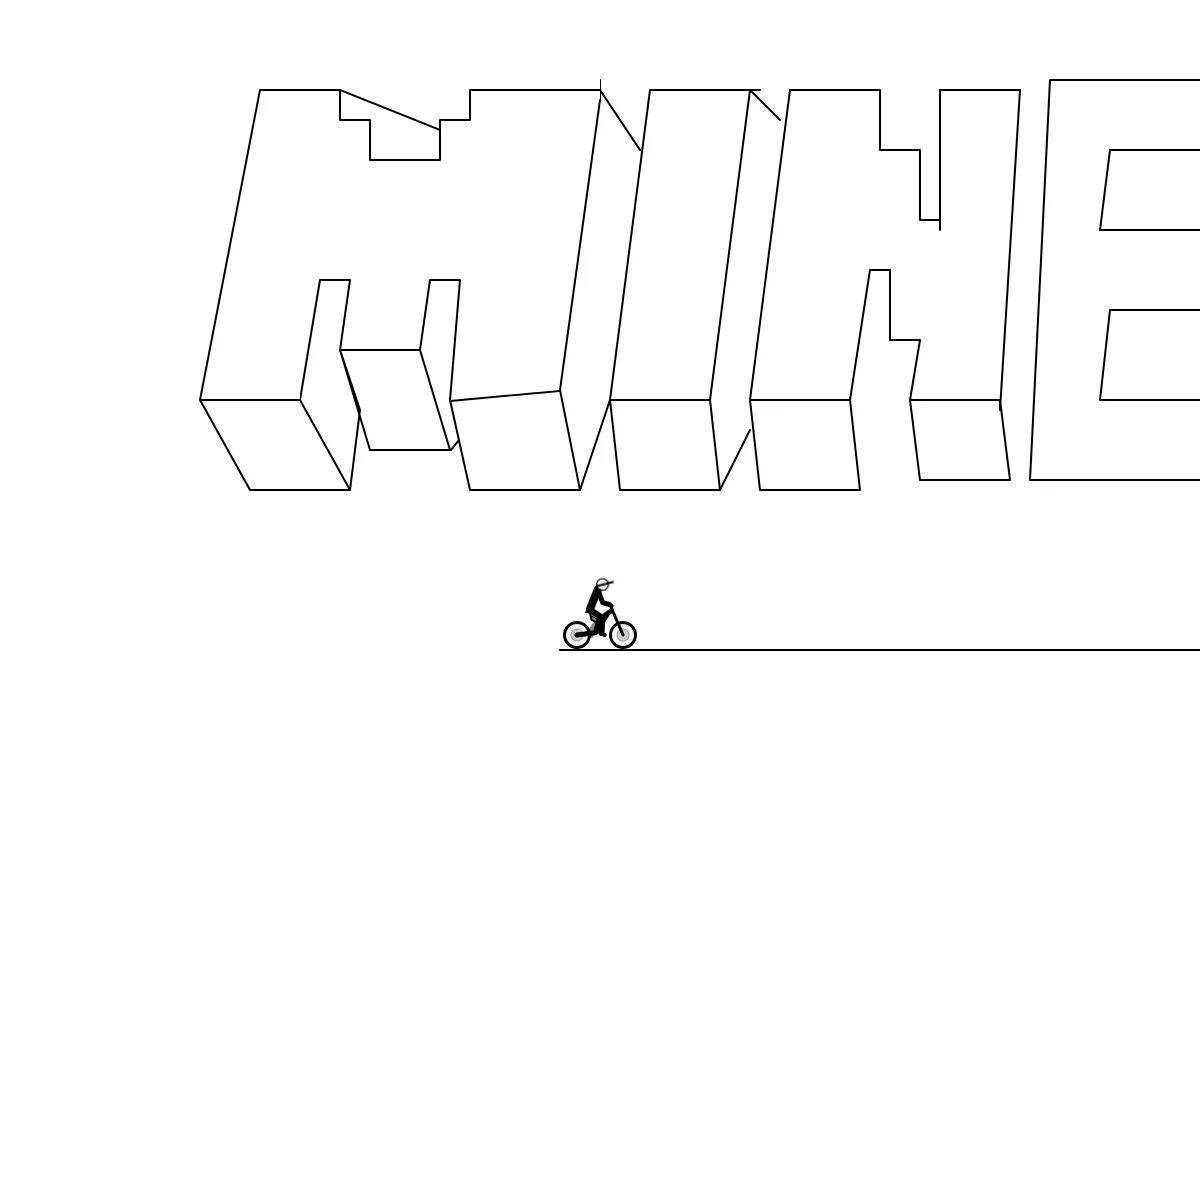 Live minecraft logo coloring page